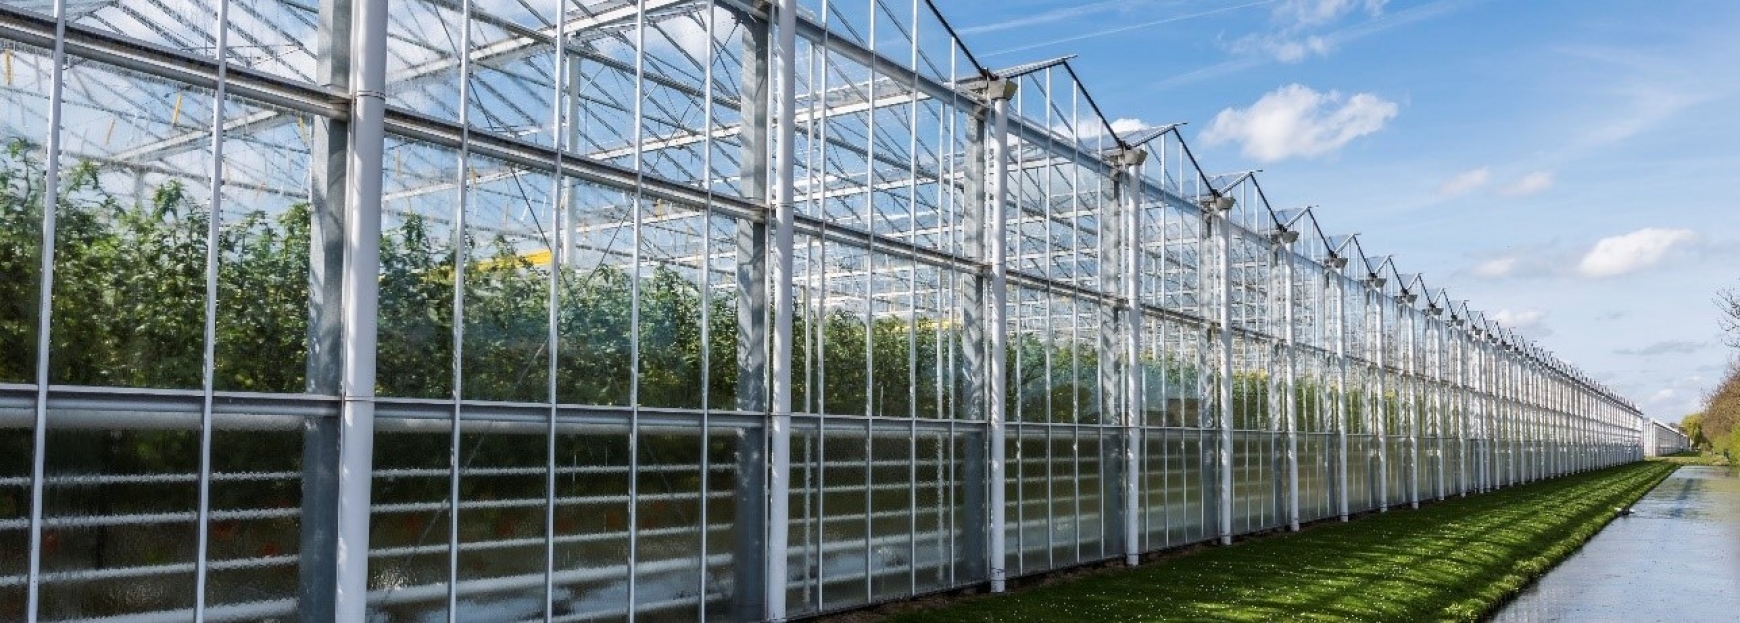 The outside of a large greenhouse growing tomatoes with blue sky behind